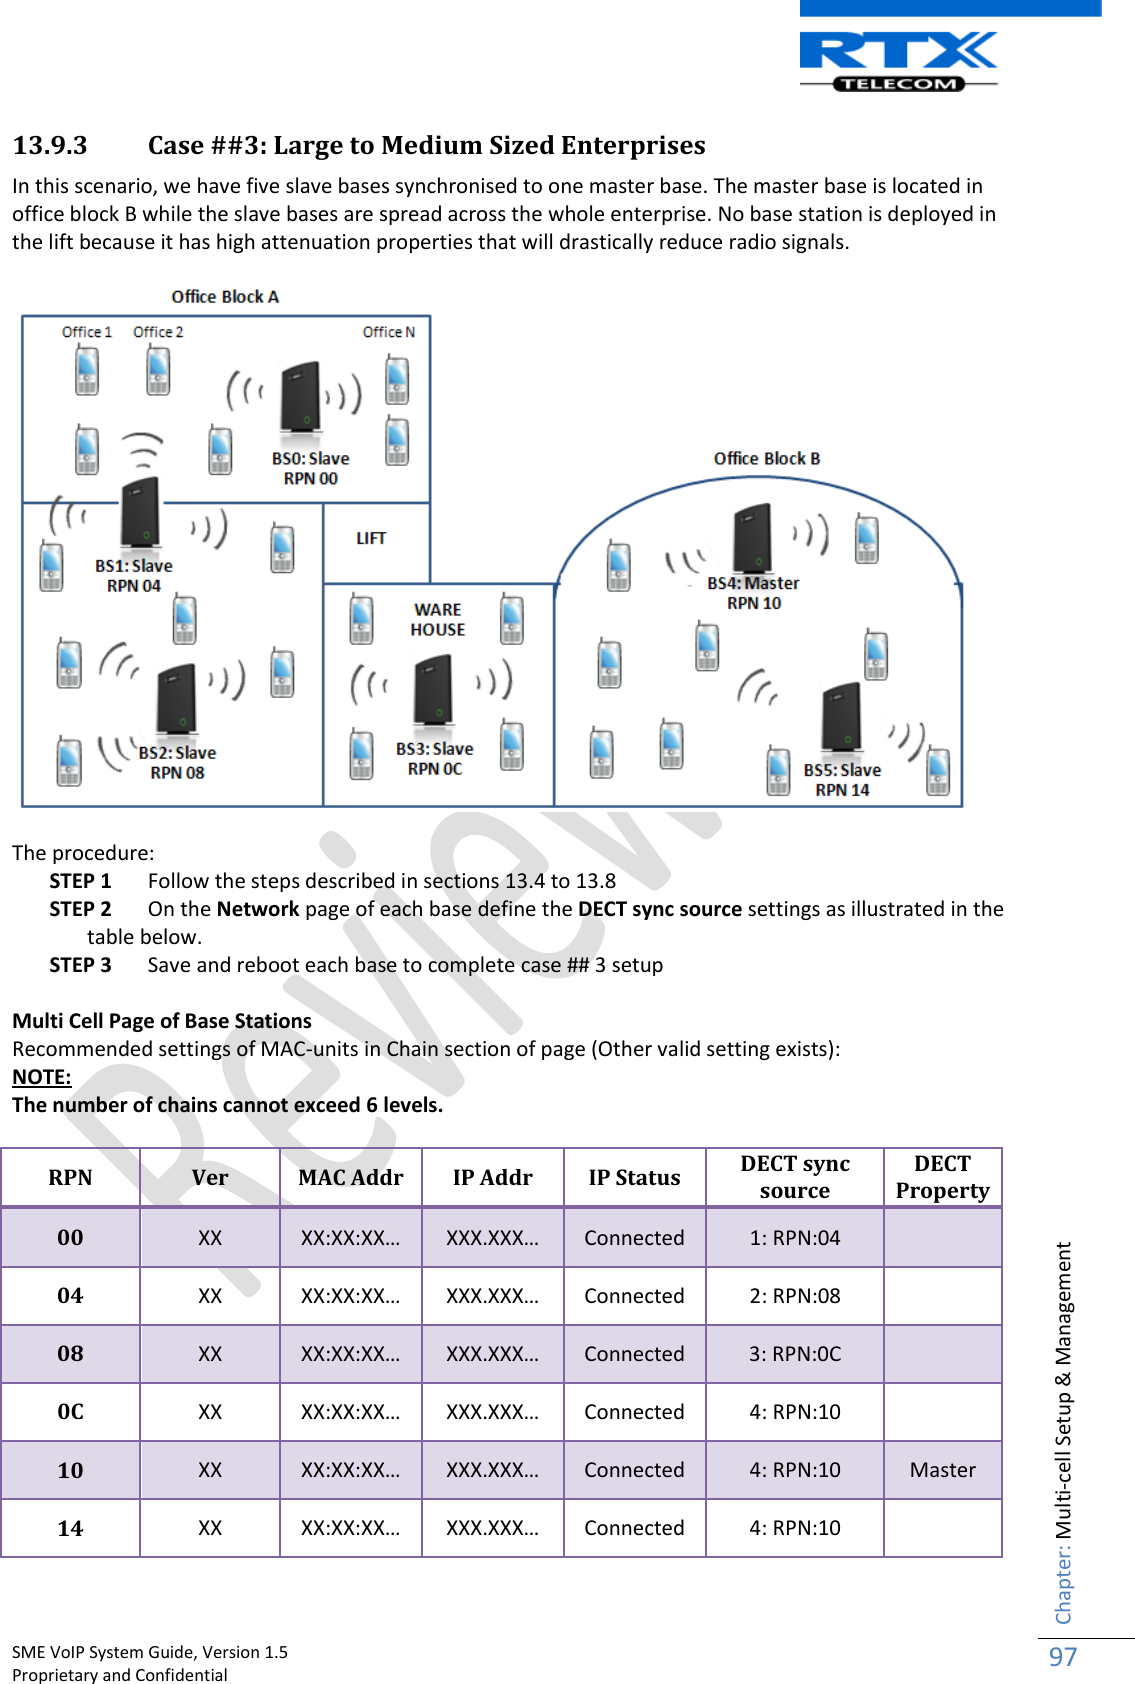    SME VoIP System Guide, Version 1.5                                                                                                                                                          Proprietary and Confidential    Chapter: Multi-cell Setup &amp; Management 97  13.9.3 Case ##3: Large to Medium Sized Enterprises In this scenario, we have five slave bases synchronised to one master base. The master base is located in office block B while the slave bases are spread across the whole enterprise. No base station is deployed in the lift because it has high attenuation properties that will drastically reduce radio signals.    The procedure: STEP 1 Follow the steps described in sections 13.4 to 13.8 STEP 2 On the Network page of each base define the DECT sync source settings as illustrated in the table below. STEP 3 Save and reboot each base to complete case ## 3 setup  Multi Cell Page of Base Stations Recommended settings of MAC-units in Chain section of page (Other valid setting exists): NOTE: The number of chains cannot exceed 6 levels.  RPN Ver MAC Addr IP Addr IP Status DECT sync source DECT Property 00 XX XX:XX:XX… XXX.XXX… Connected 1: RPN:04  04 XX XX:XX:XX… XXX.XXX… Connected 2: RPN:08  08 XX XX:XX:XX… XXX.XXX… Connected 3: RPN:0C  0C XX XX:XX:XX… XXX.XXX… Connected 4: RPN:10  10 XX XX:XX:XX… XXX.XXX… Connected 4: RPN:10 Master 14 XX XX:XX:XX… XXX.XXX… Connected 4: RPN:10   